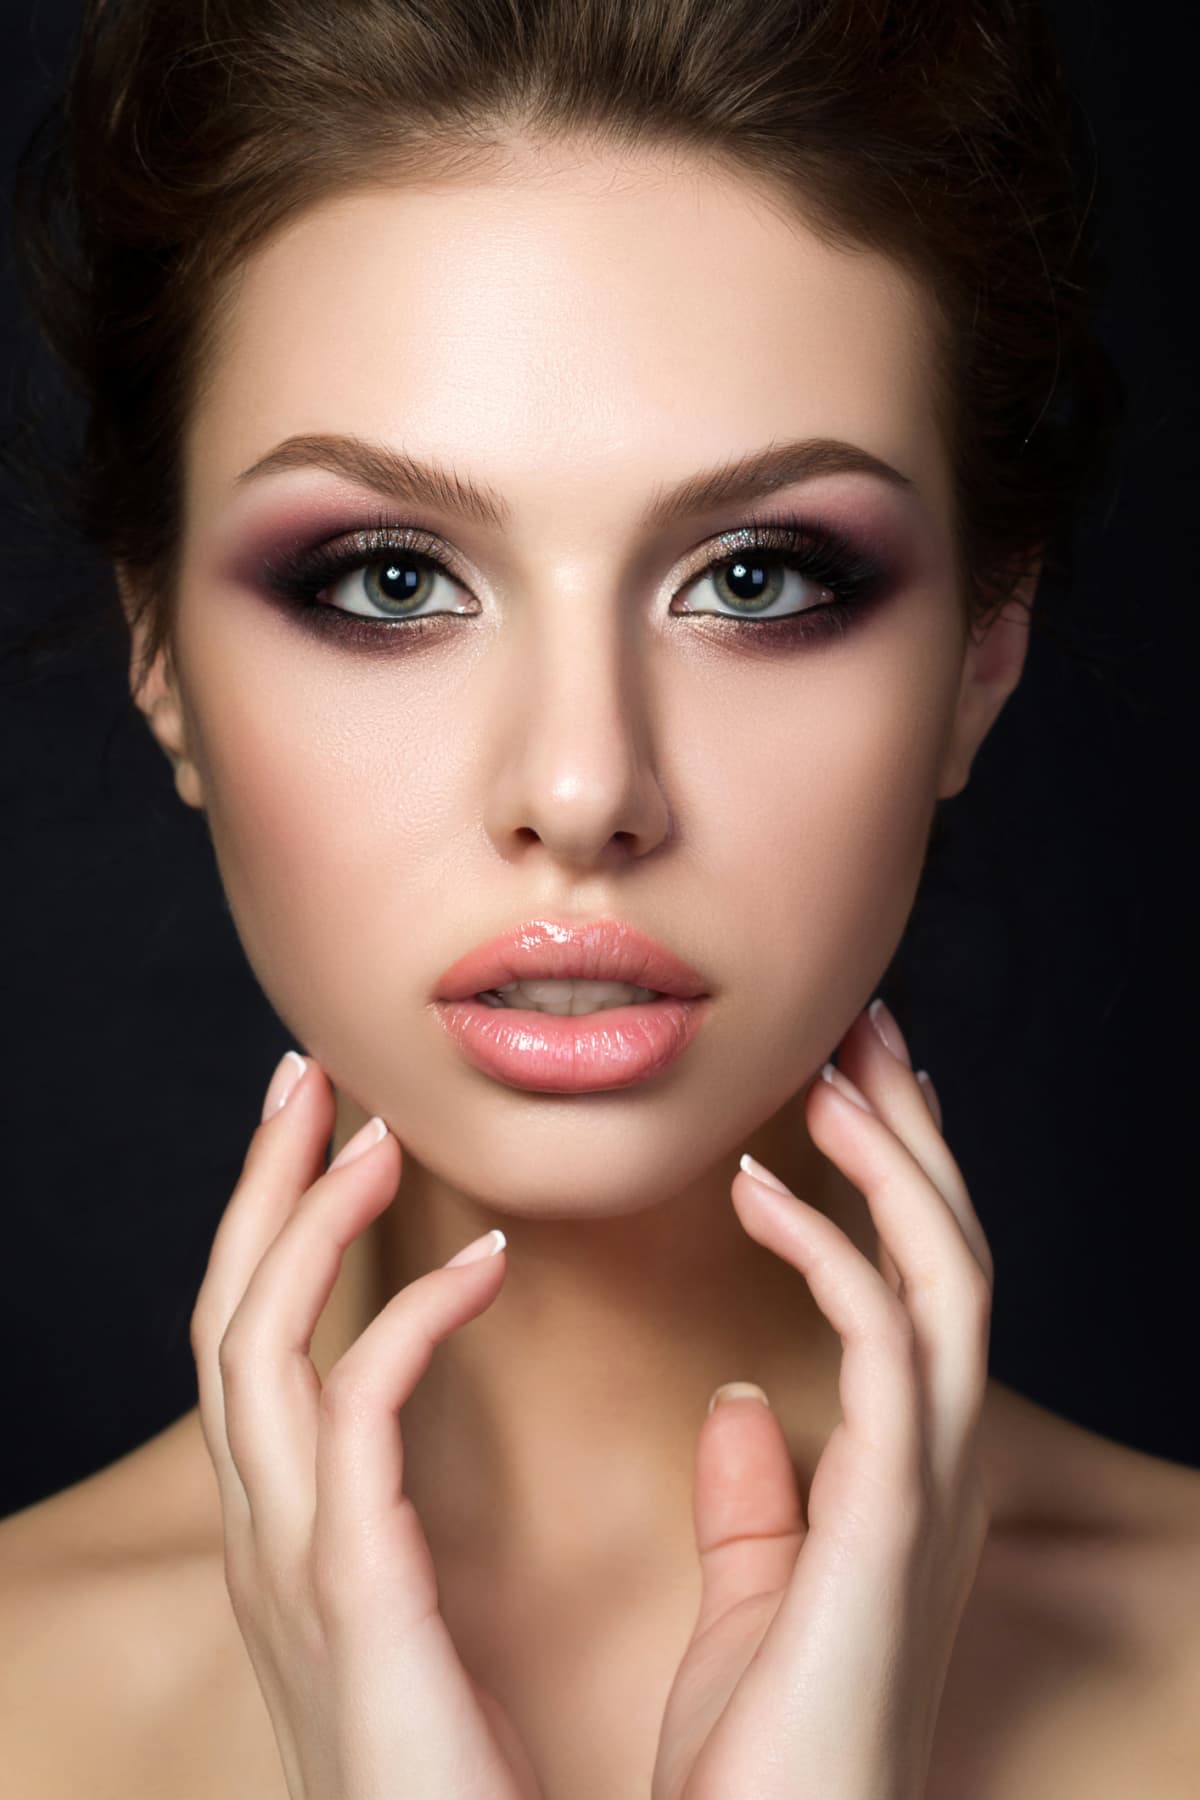 Close-up portrait of beautiful woman with cat eye make-up